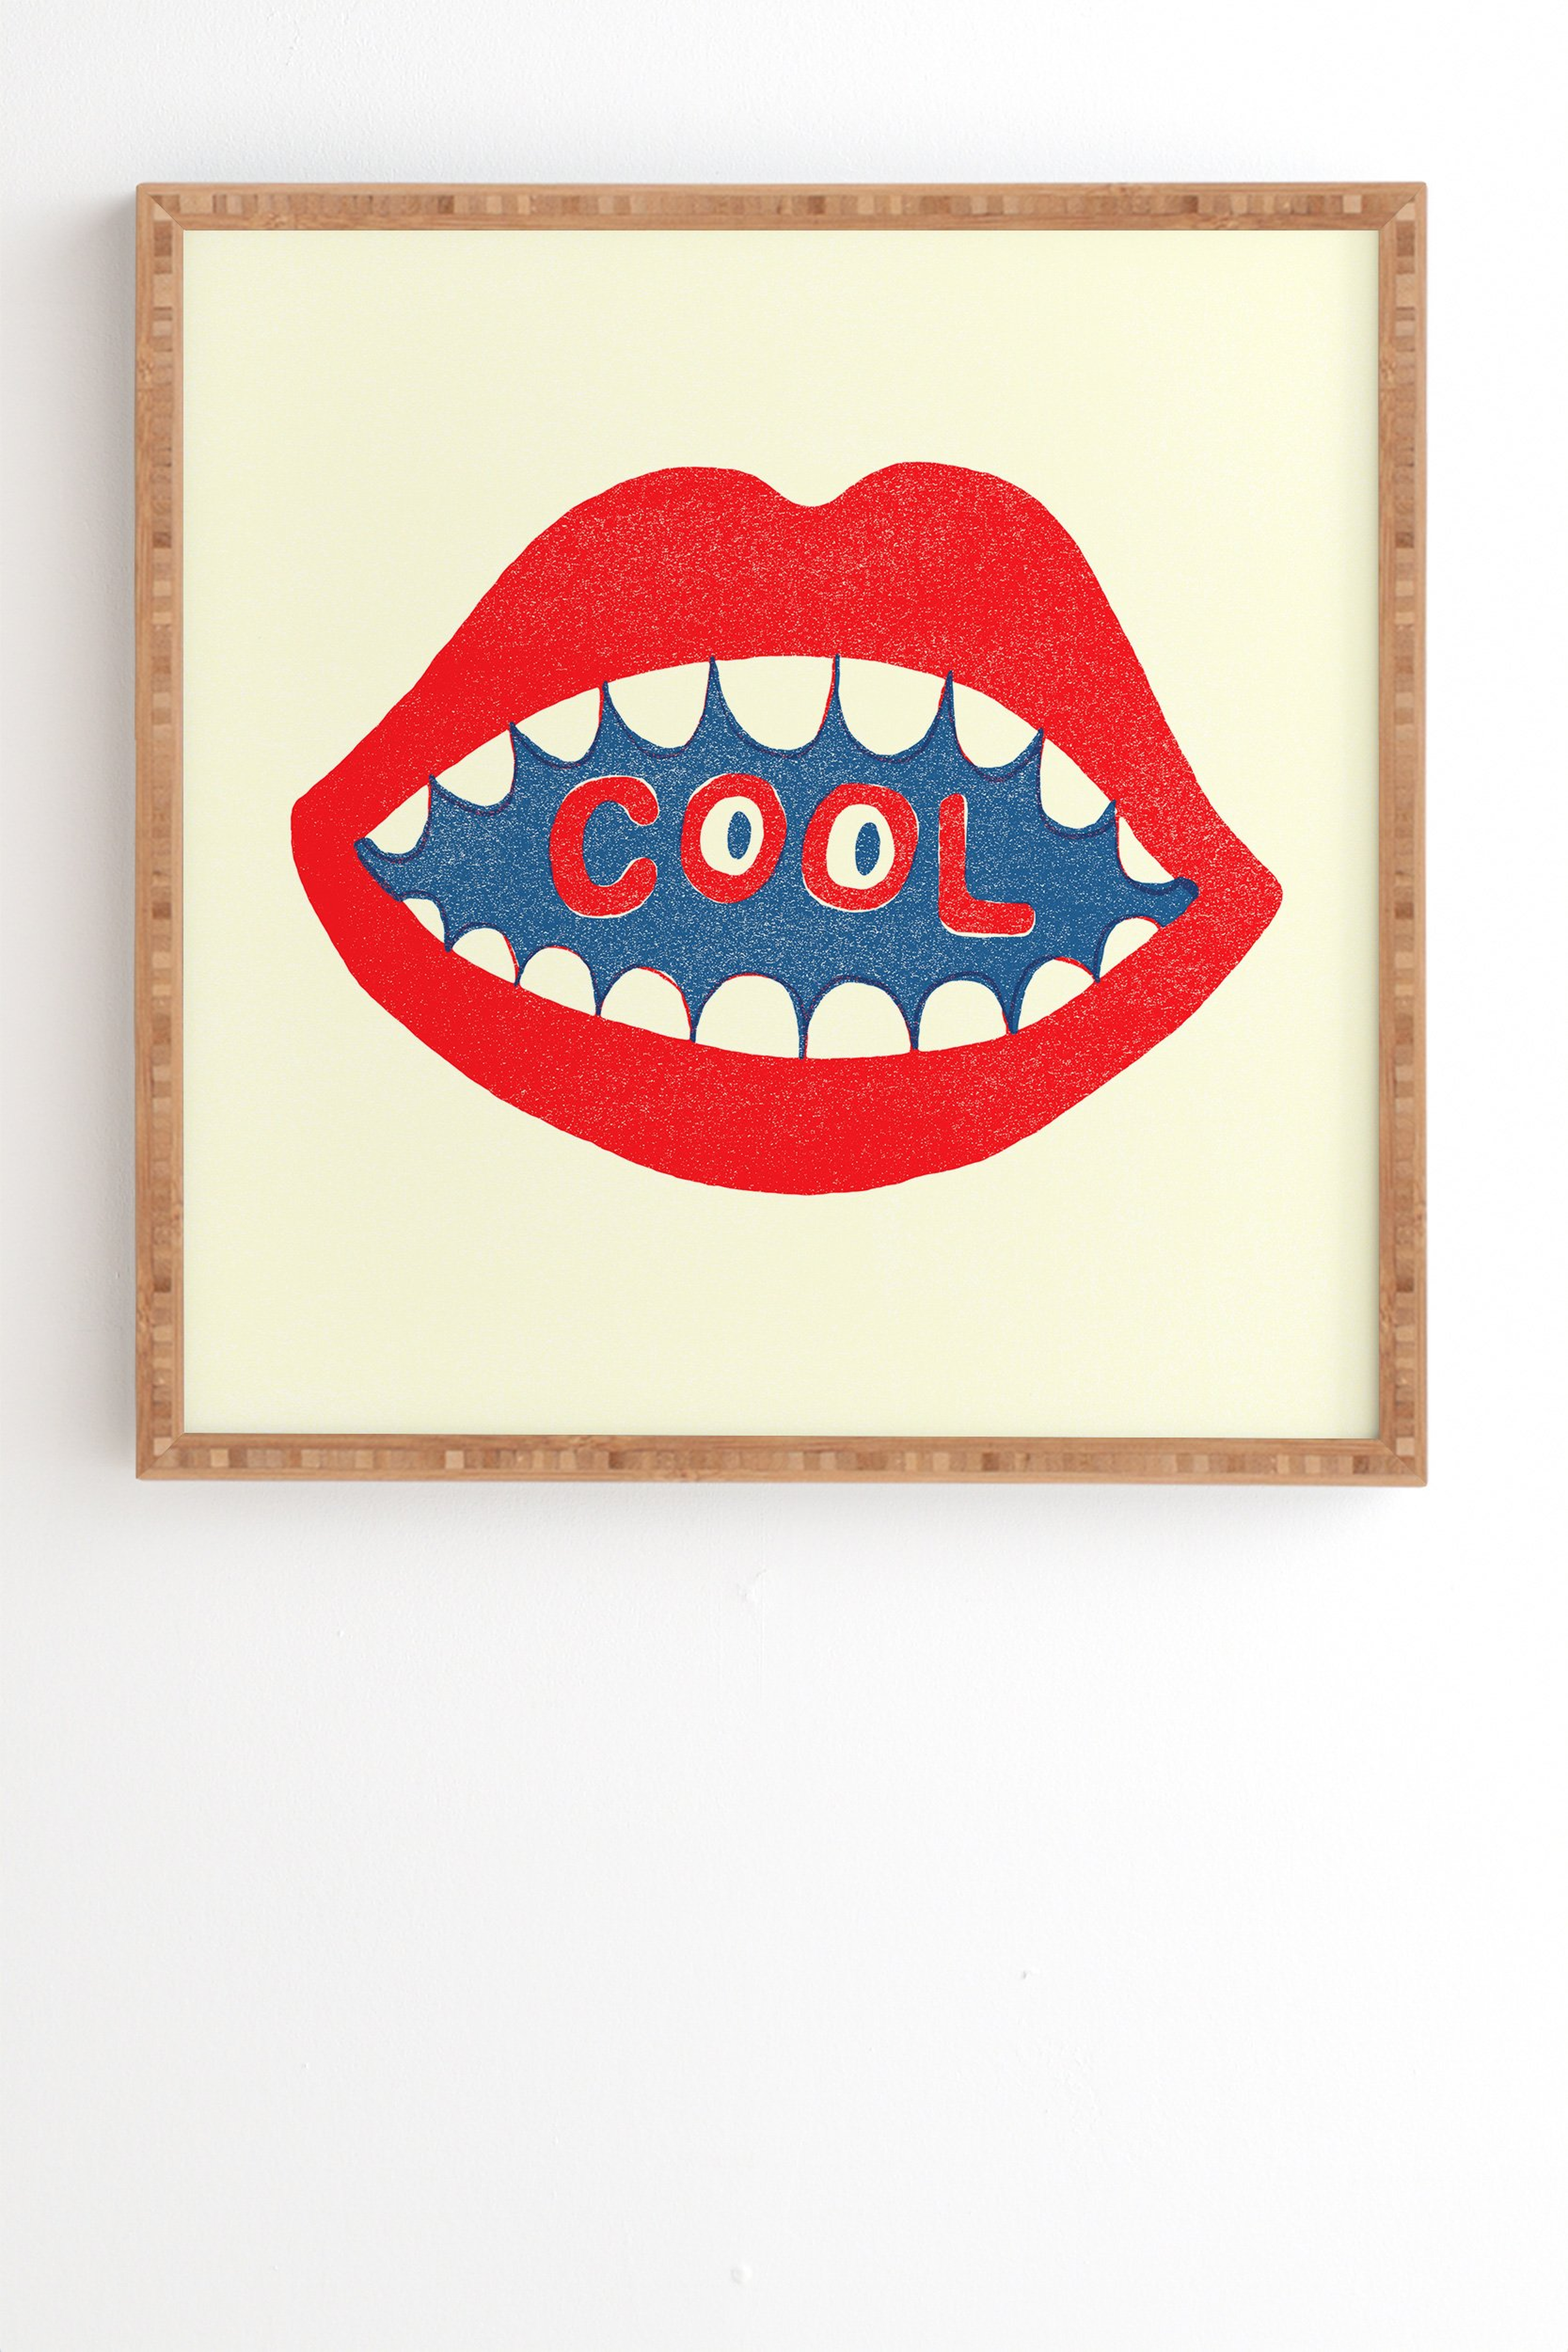 COOL MOUTH By Nick Nelson 30x30 - Wander Print Co.